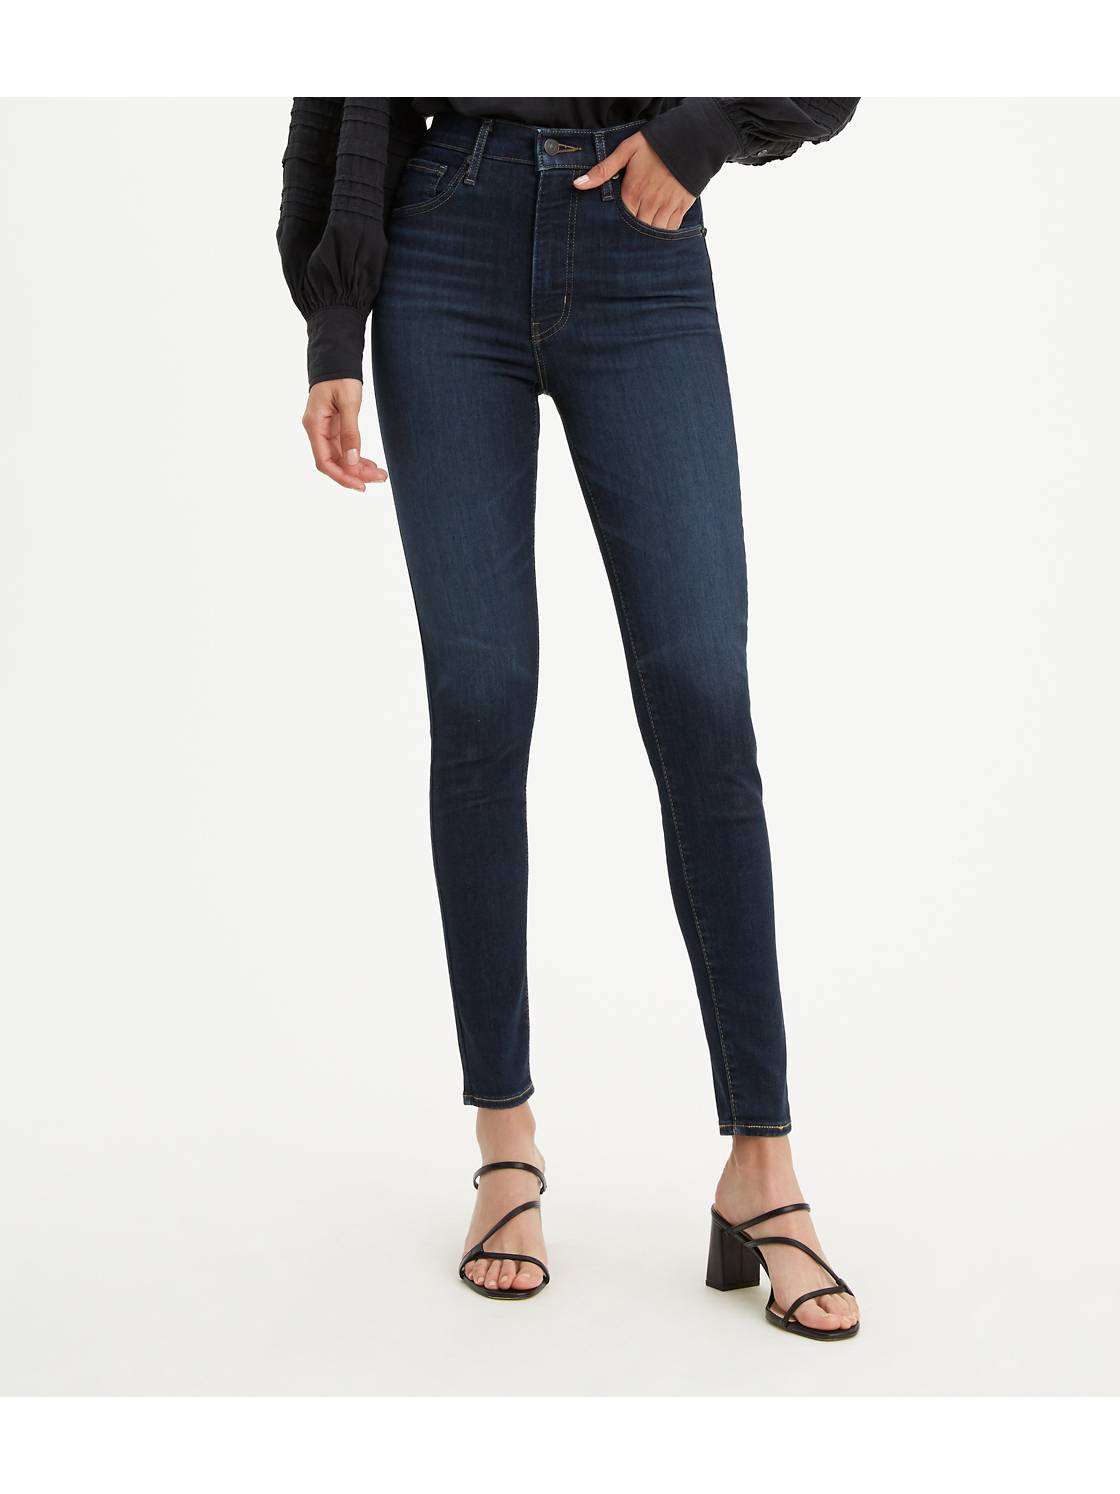 Women's Clothing for Sale - Sale on Clothing for Women | Levi's® CA